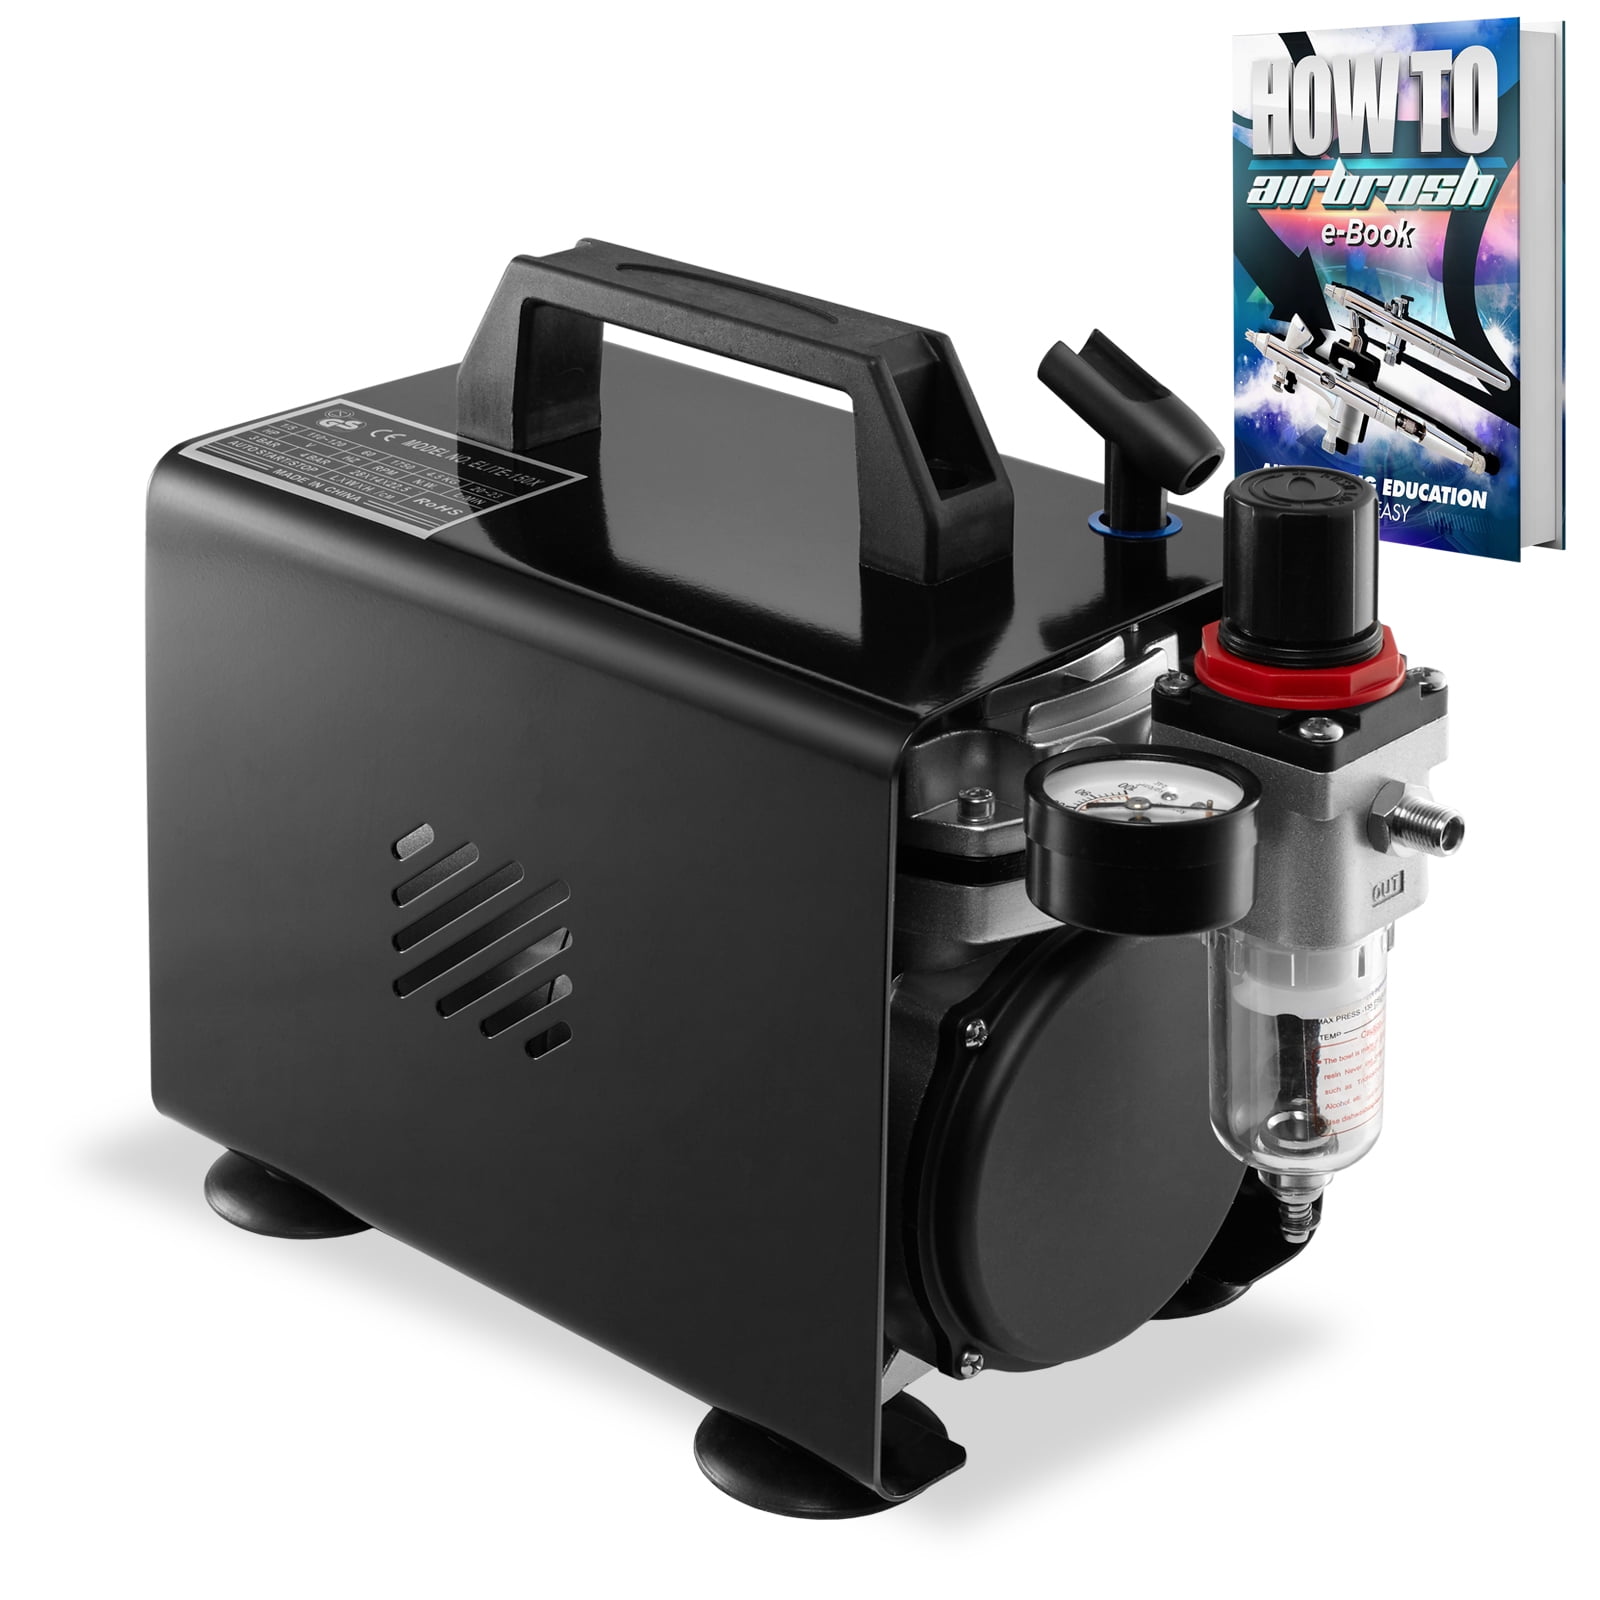  PointZero 1/5 HP Airbrush Compressor with Air Tank, Regulator,  Gauge and Water Trap - Quiet Portable Pump Silver : Tools & Home Improvement